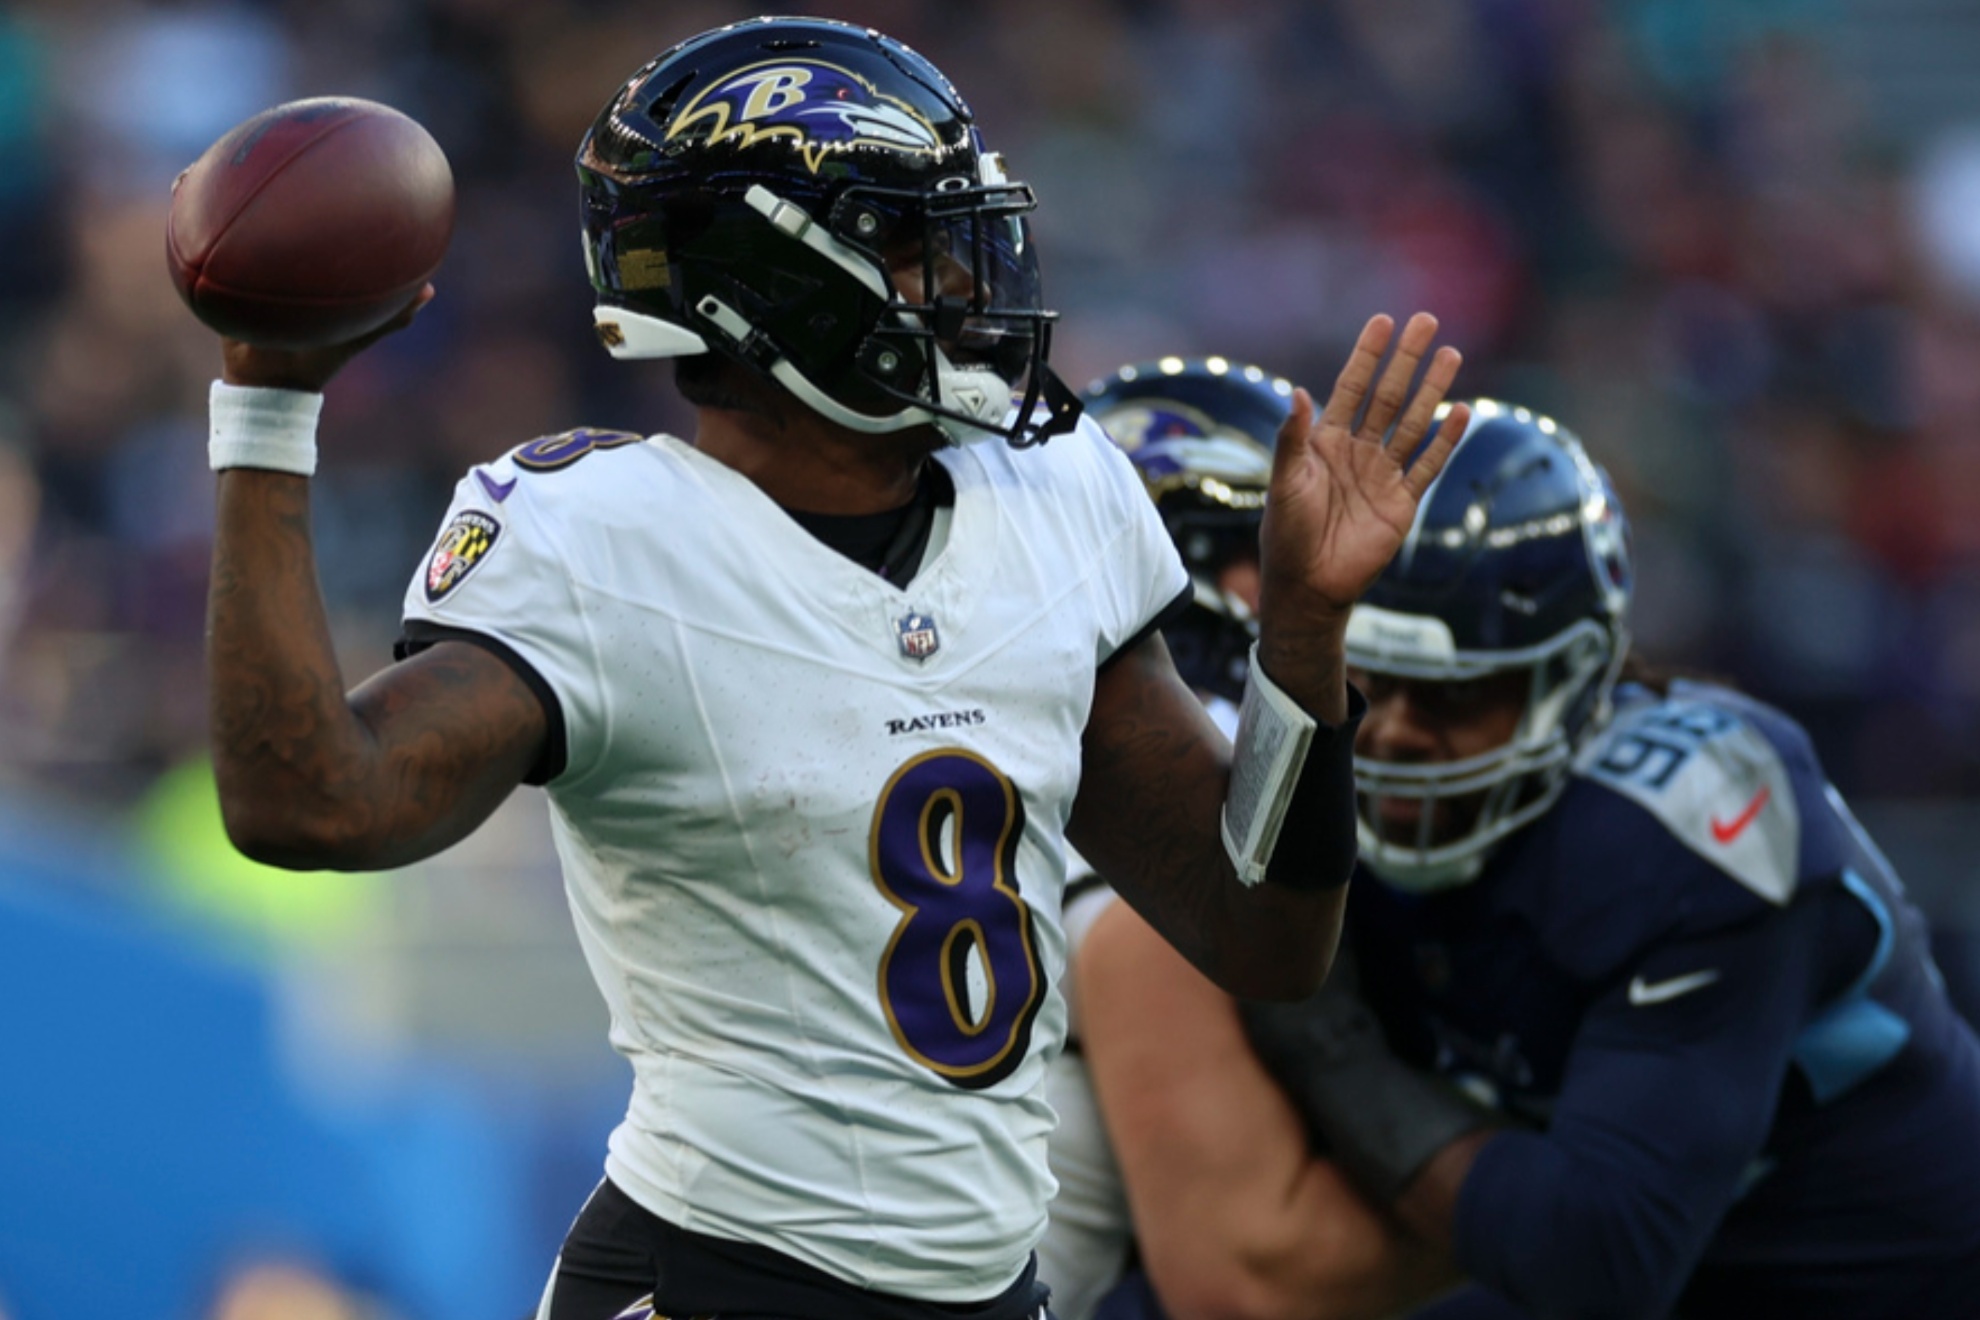 The Ravens beat the Titans in the last game of the London Series